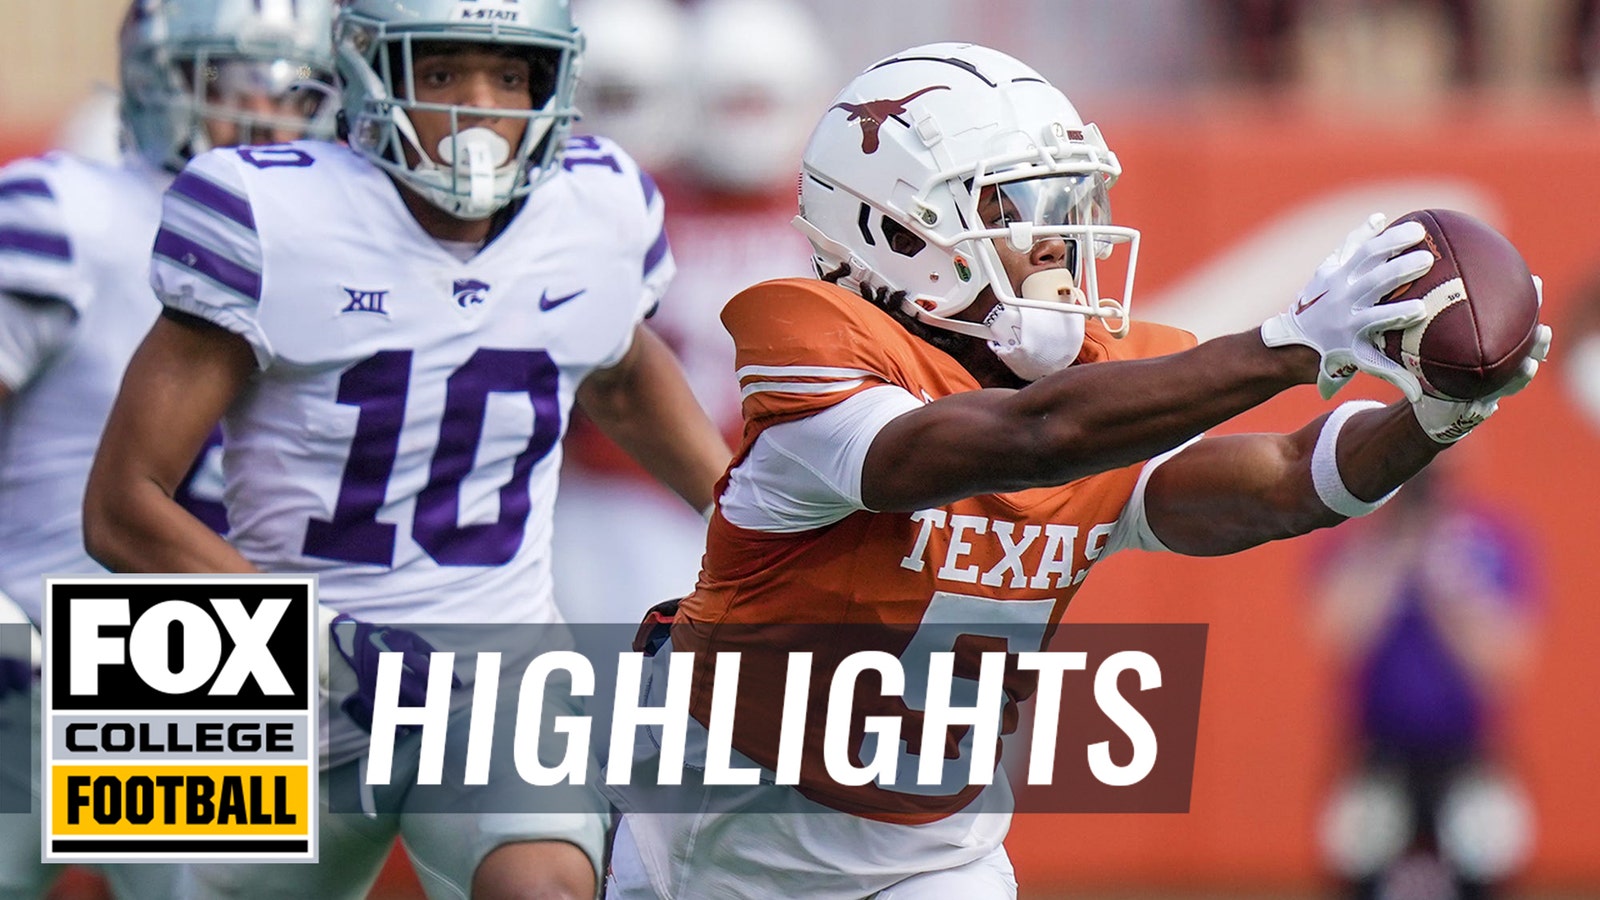 Highlights: All the great plays from Texas' thrilling win over Kansas State